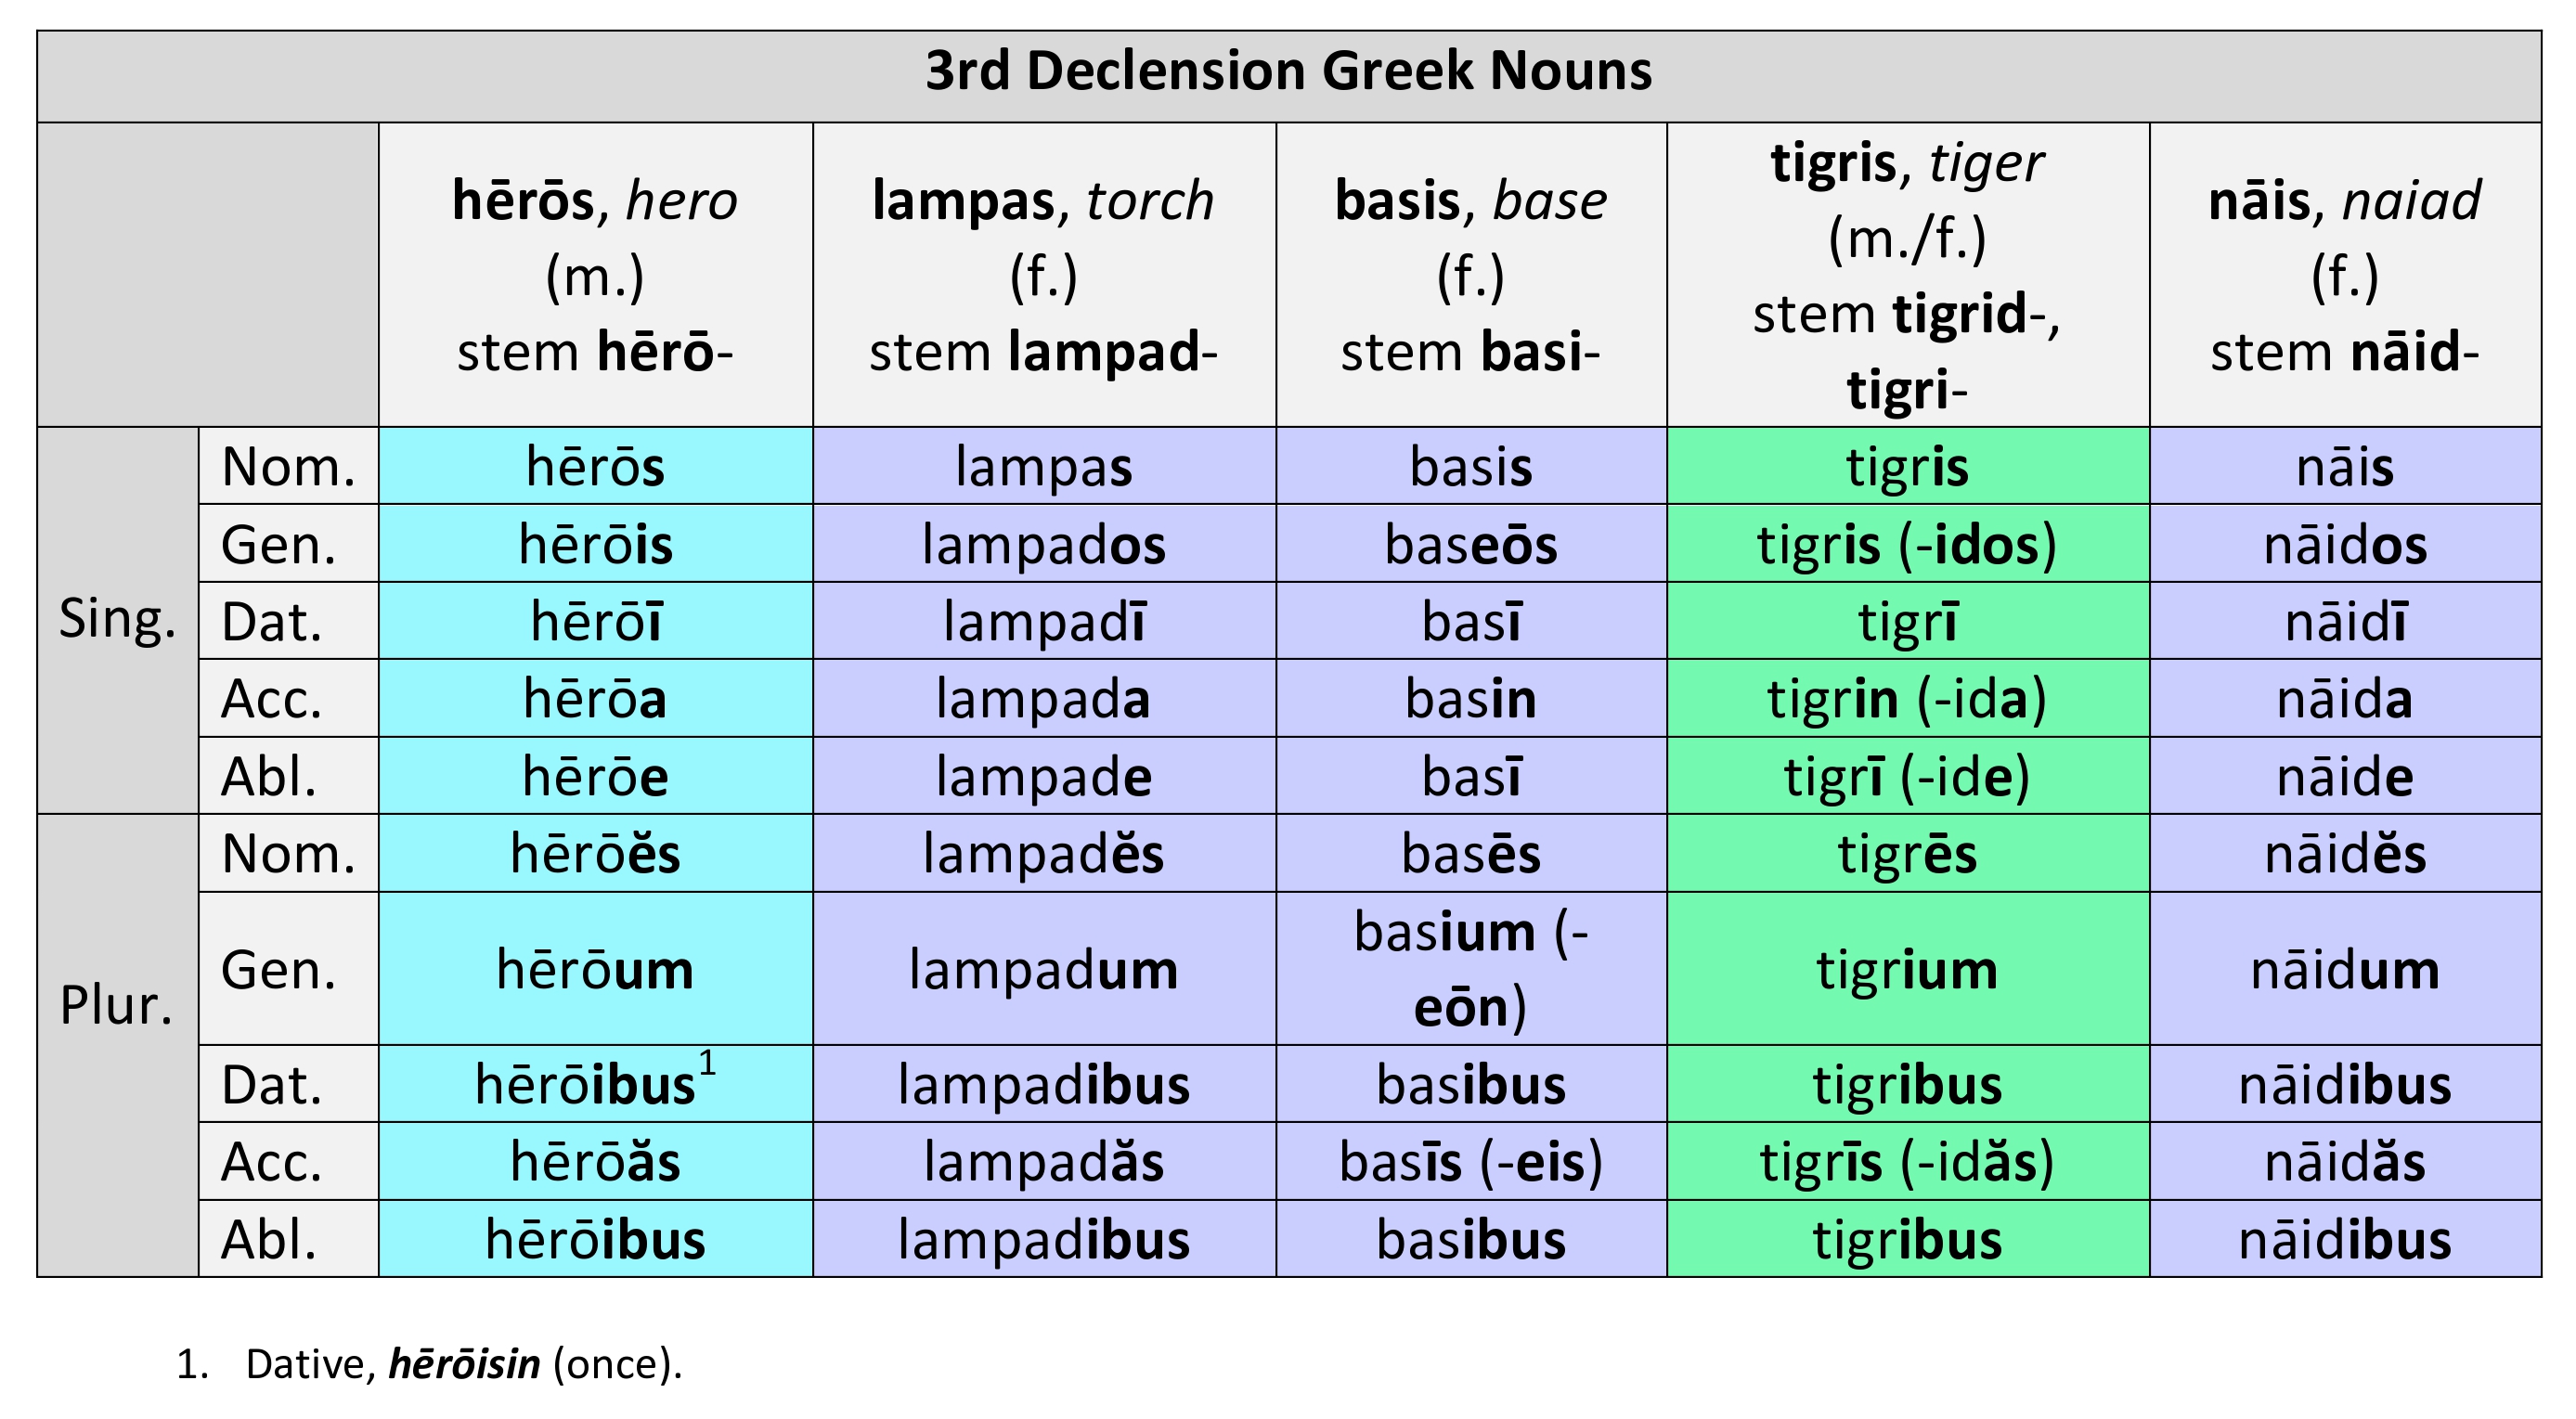 3rd Declension nouns that retain the Greek inflection